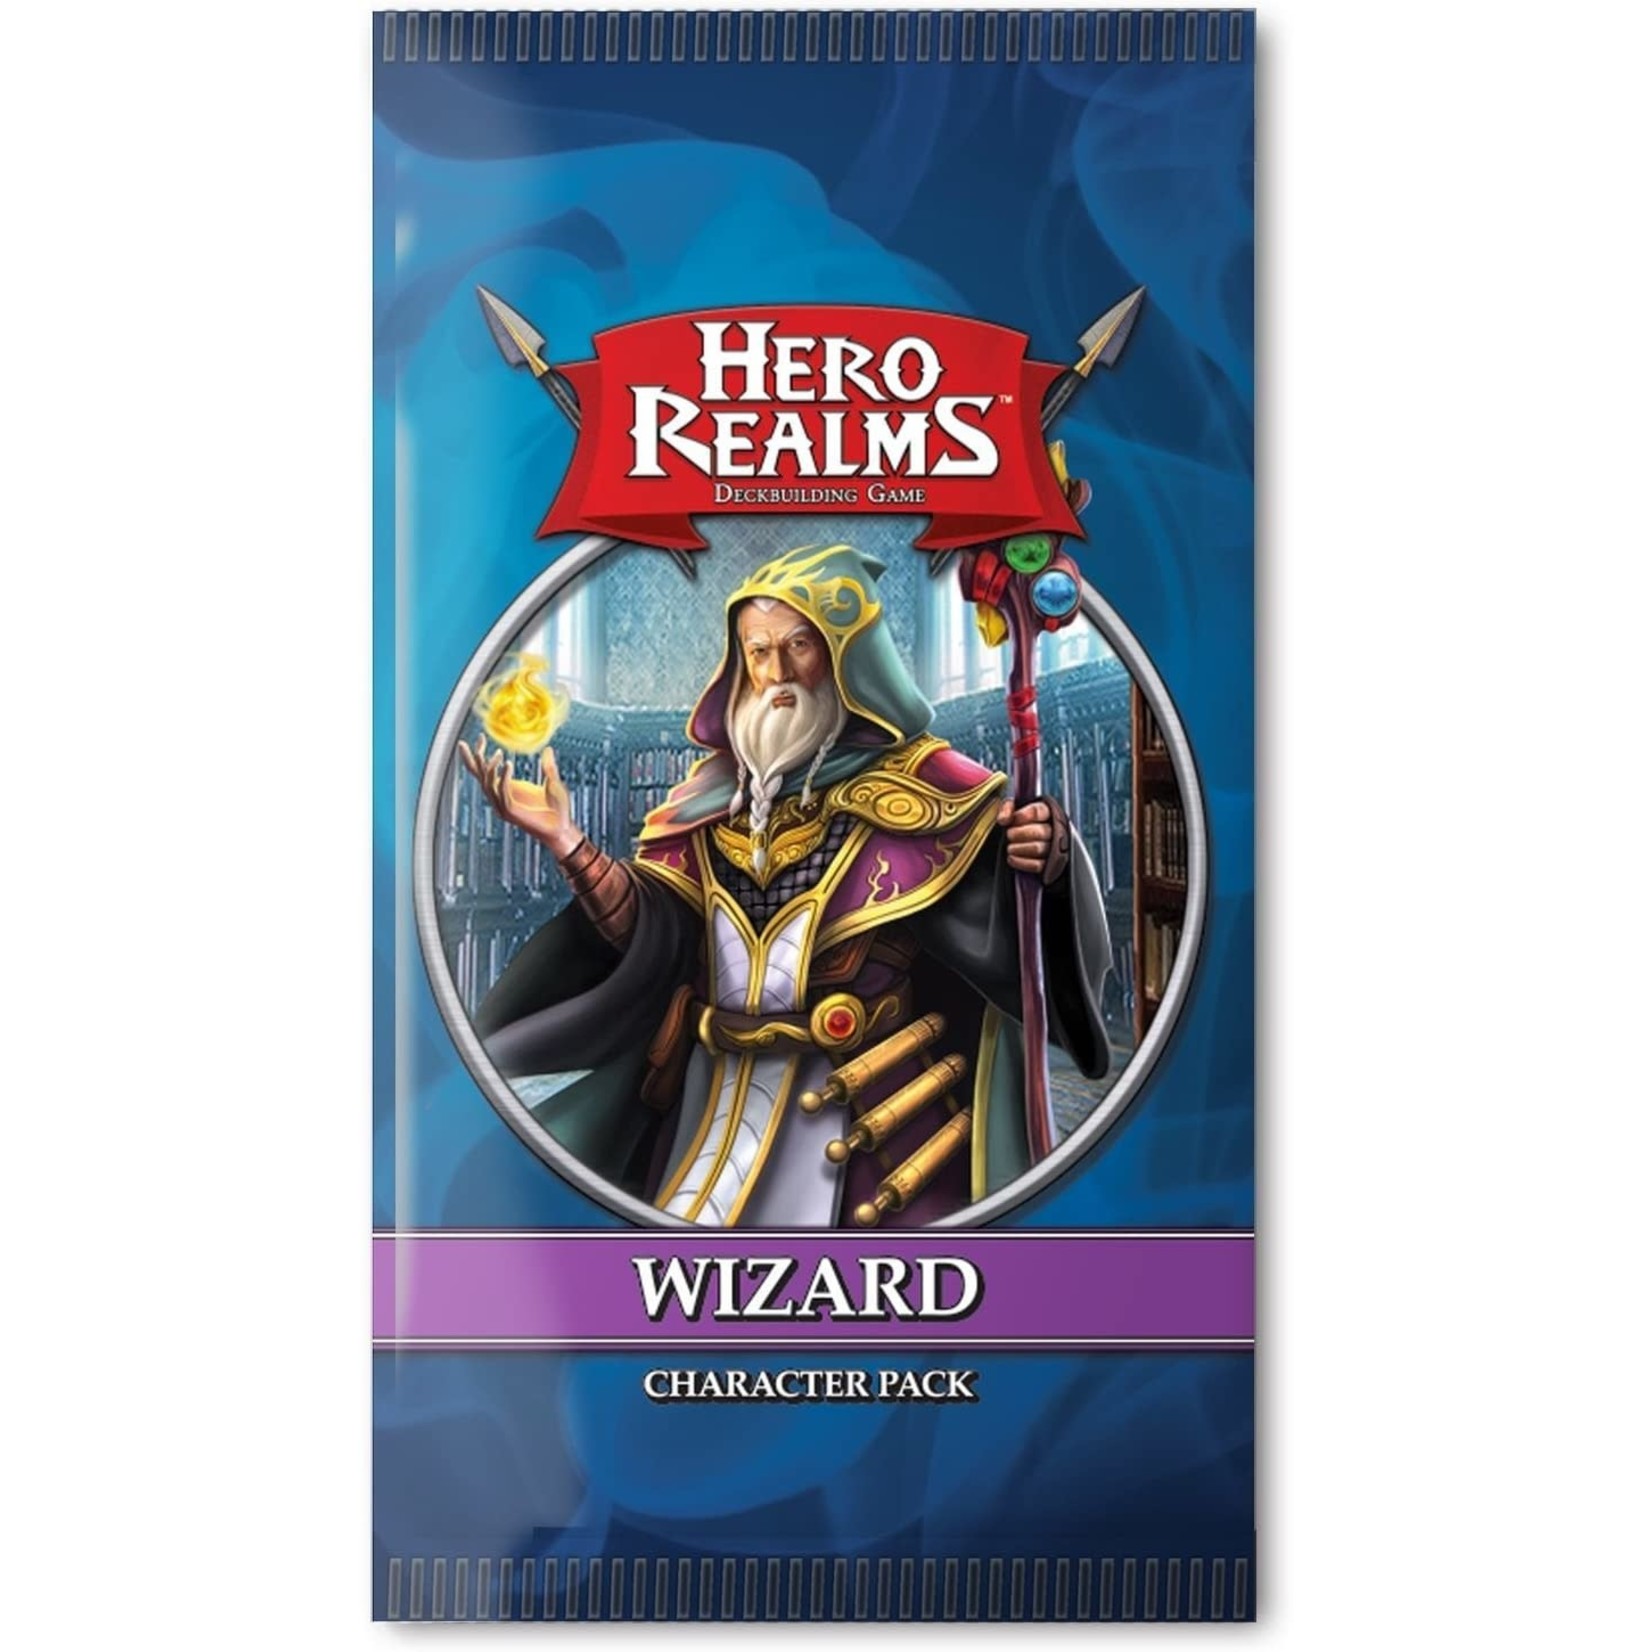 Wise Wizards Games Hero Realms: Wizard